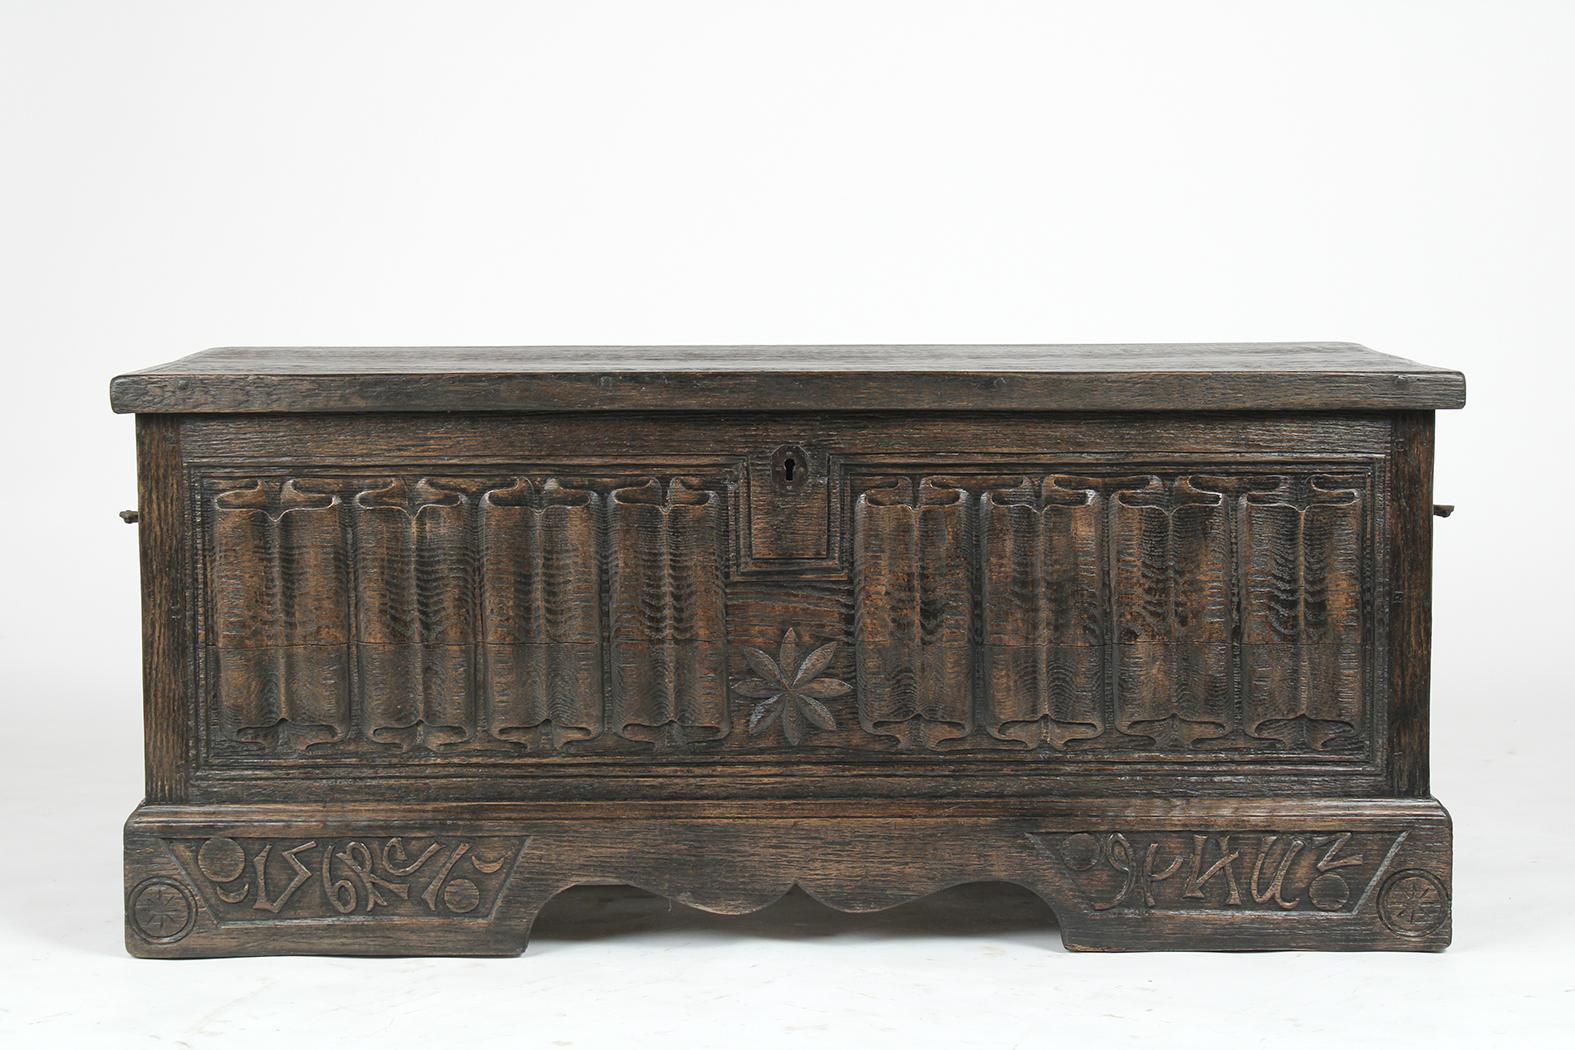 This Antique Baroque-style blanket trunk is in good condition made out of solid oak wood stained a dark walnut color with a patina finish and newly restored by our team of expert craftsmen. The trunk features a carved folding design along all sides,